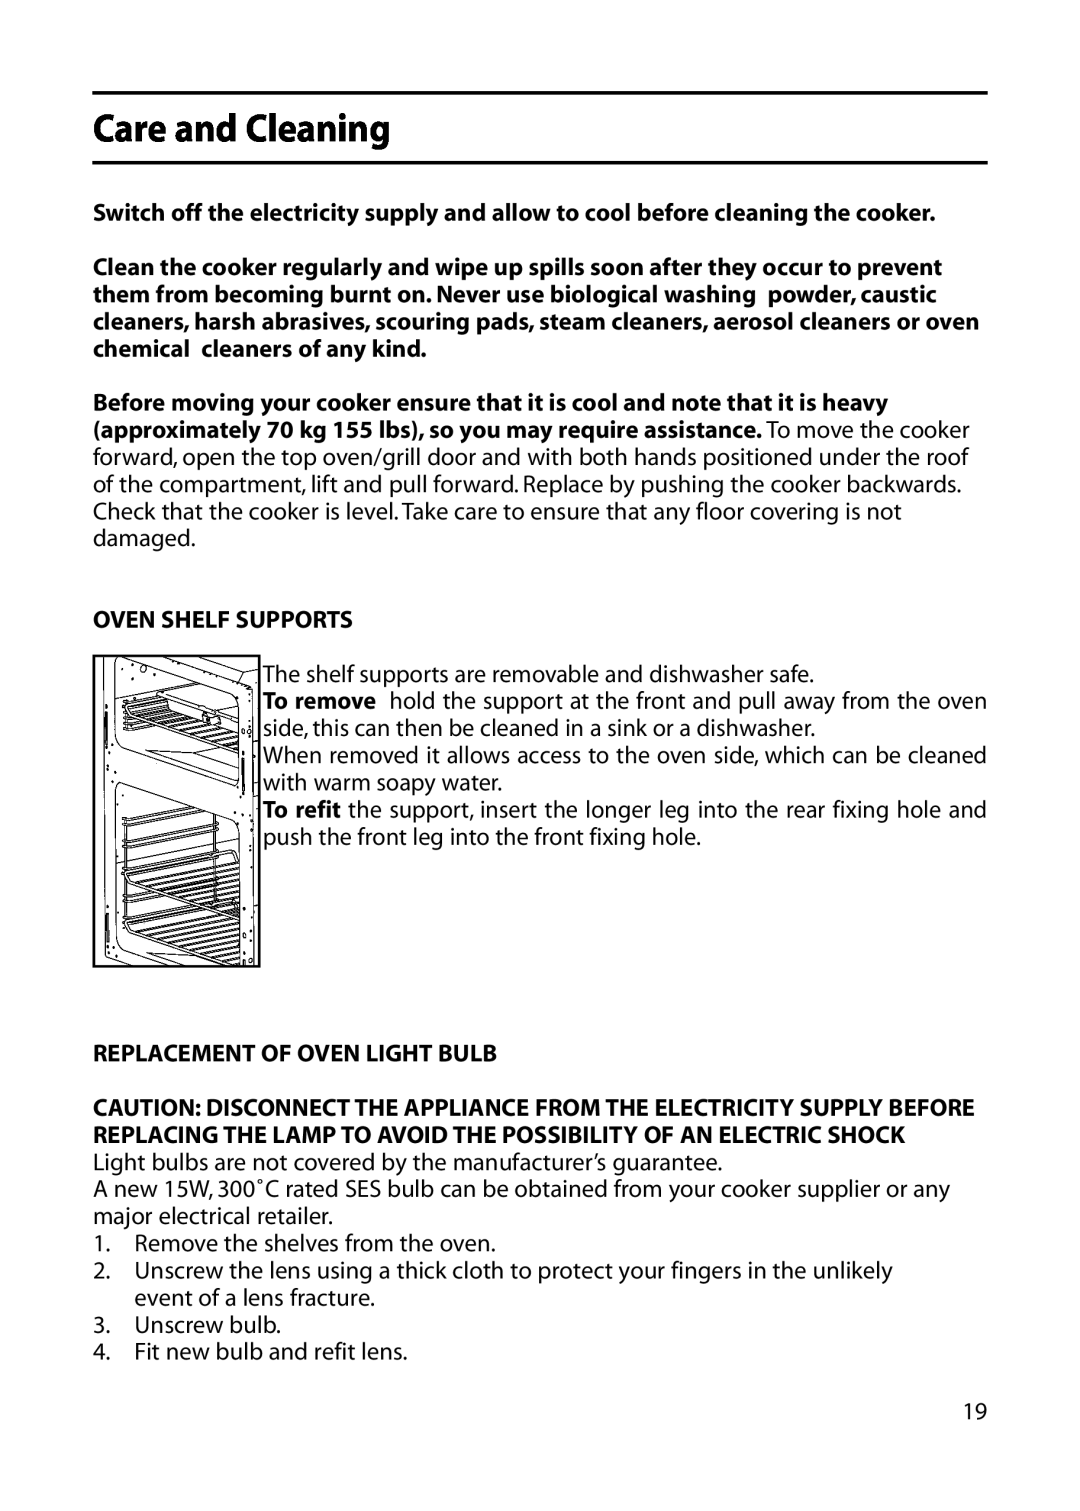 Indesit KD641E, KD643E manual Care and Cleaning, Oven Shelf Supports, Replacement Of Oven Light Bulb 